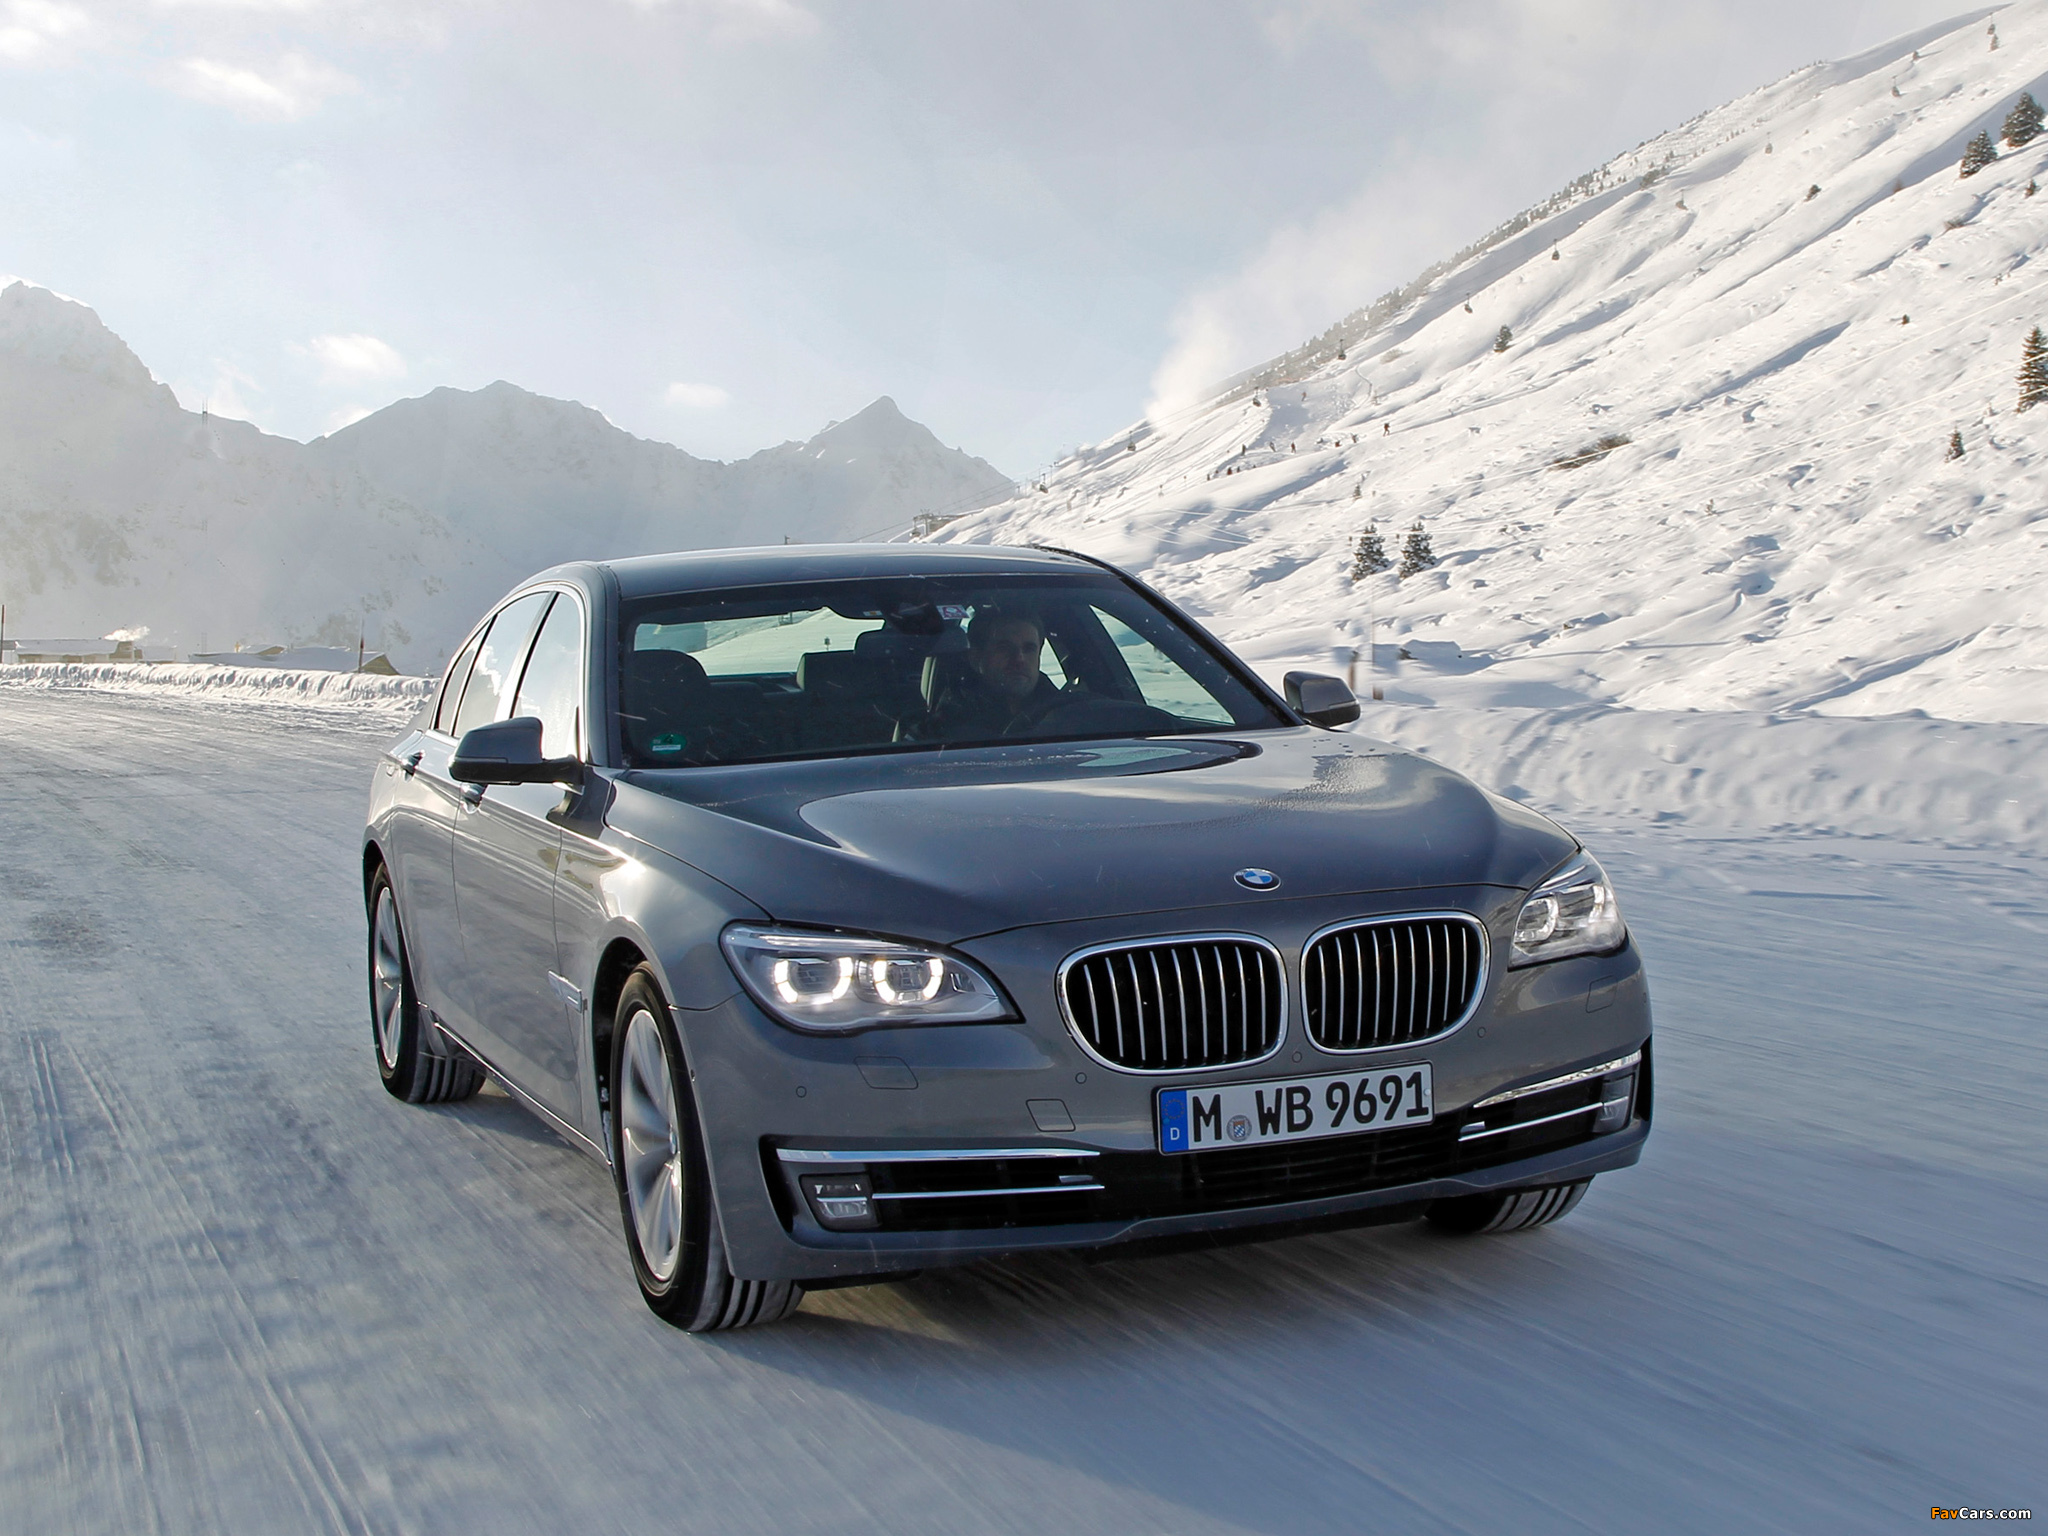 Images of BMW 740d xDrive (F01) 2012 (2048x1536)